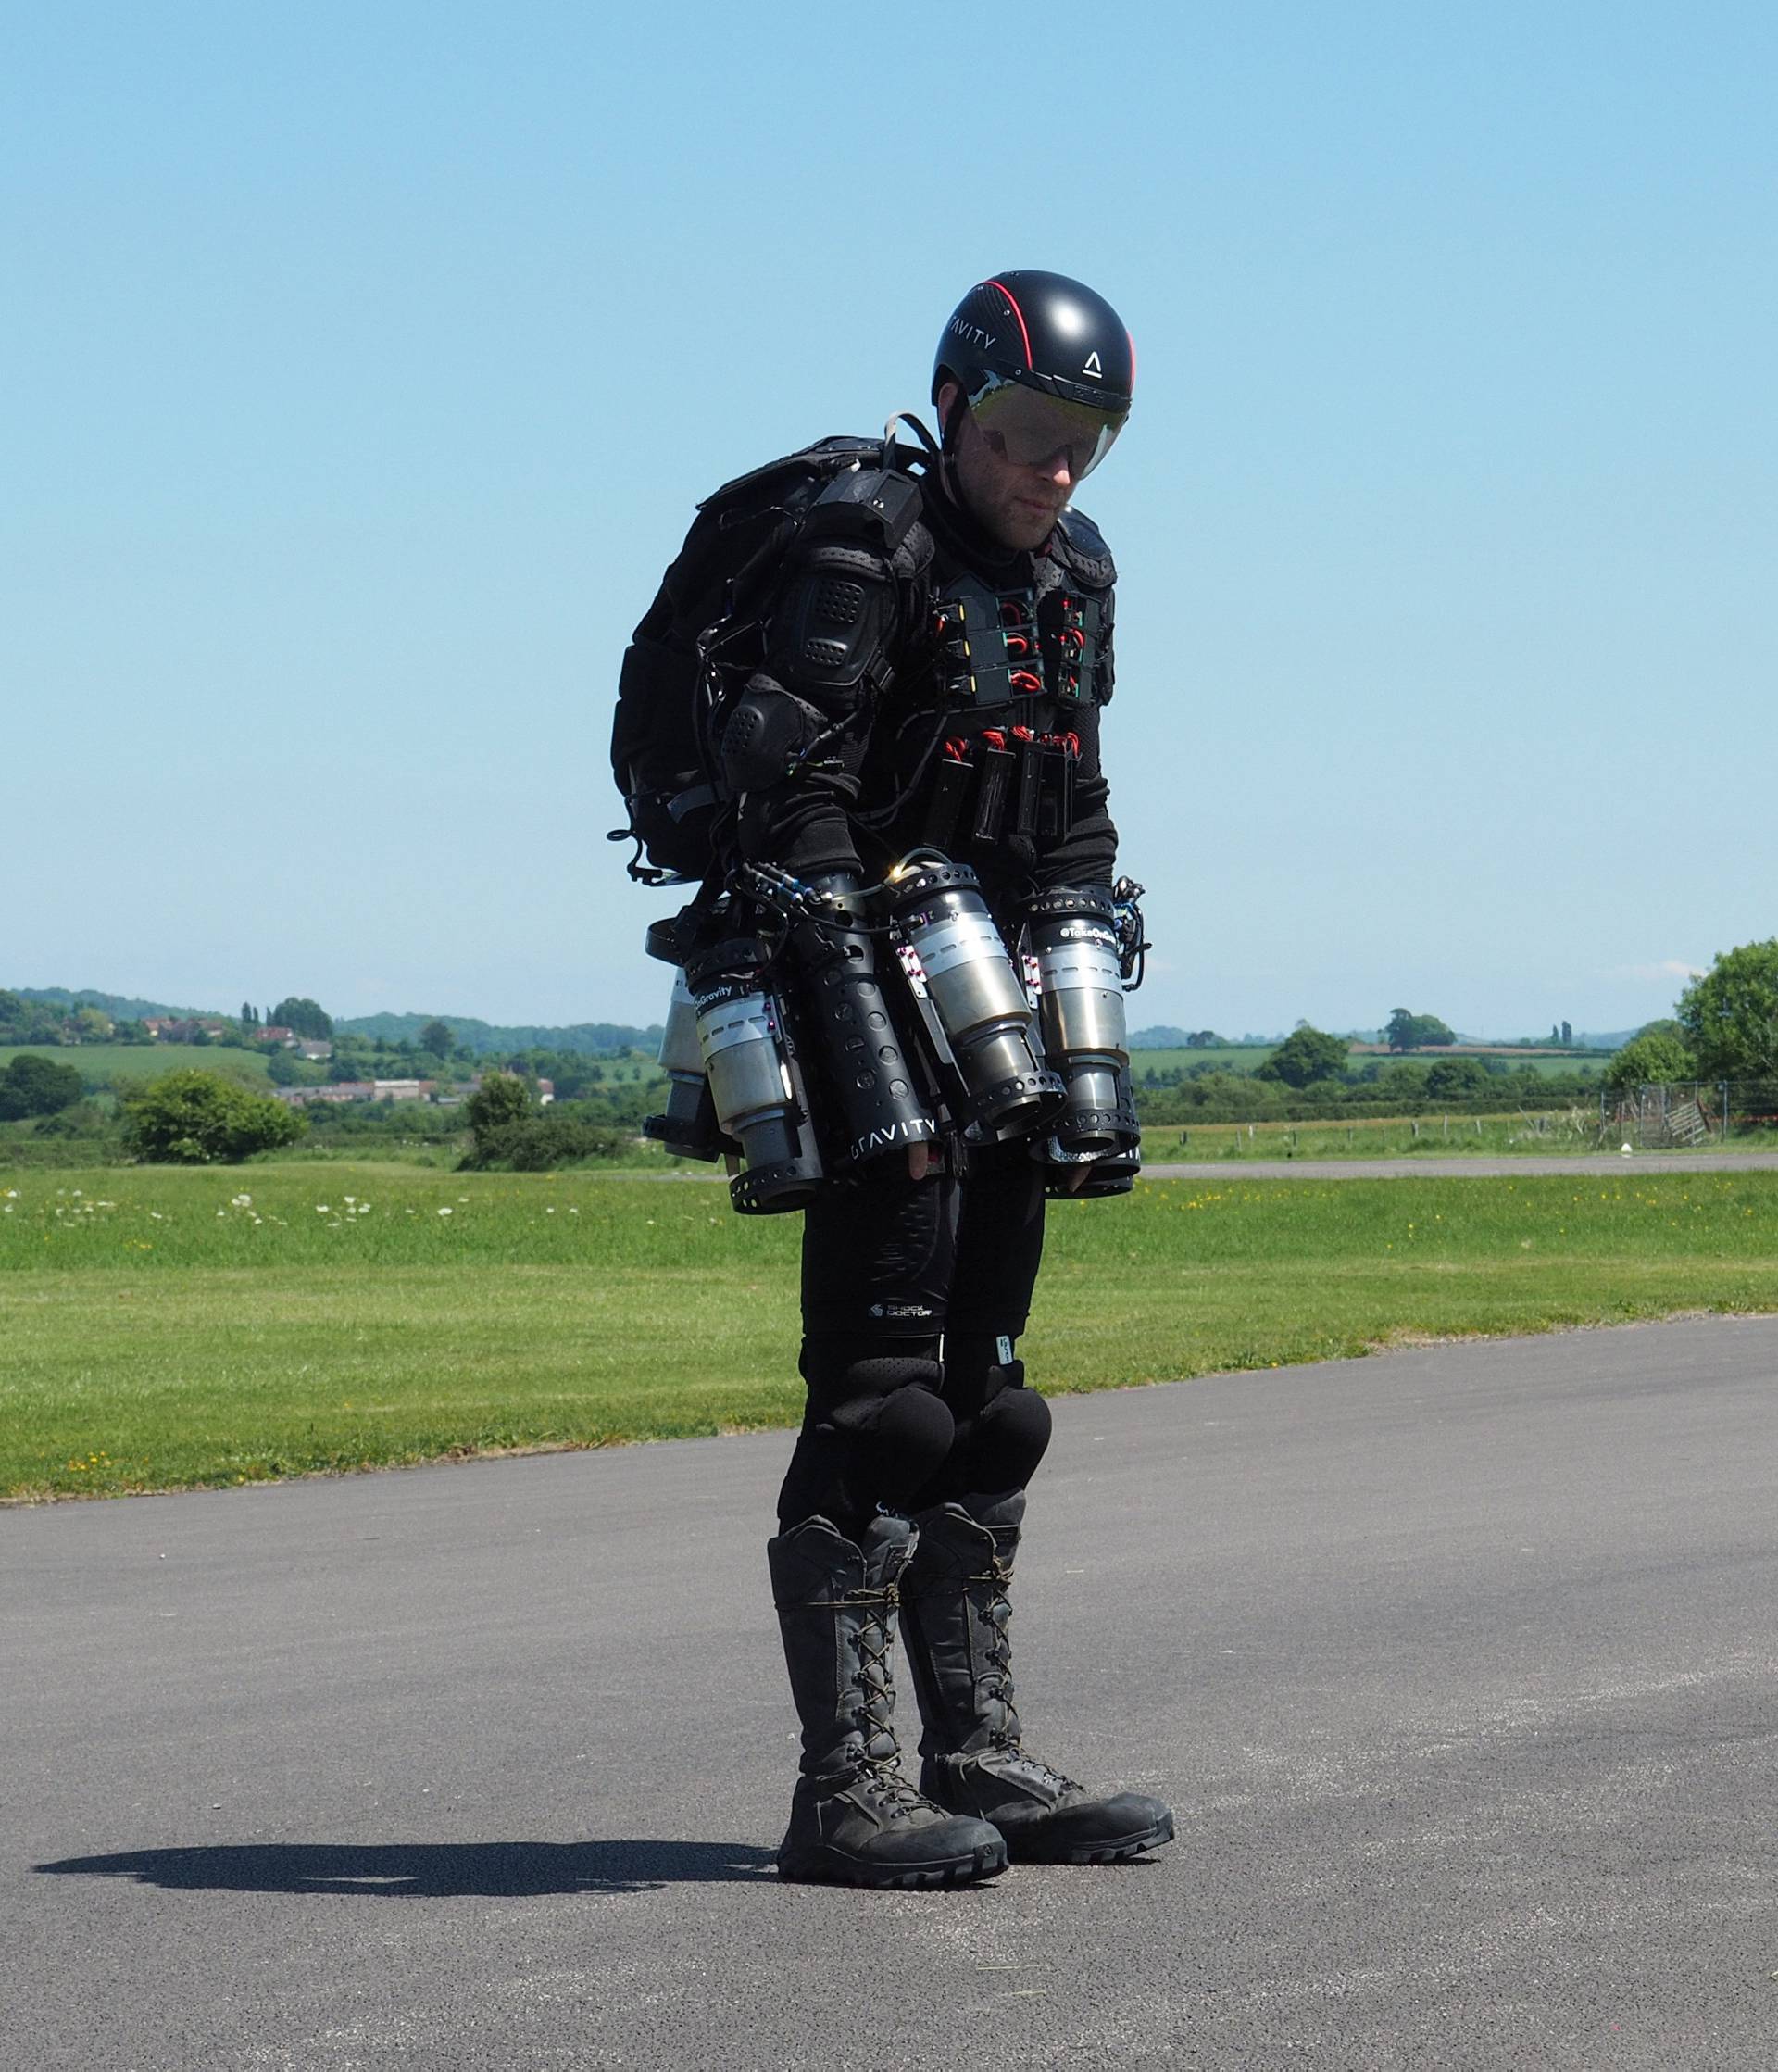 Inventor Richard Browning of technology startup Gravity prepares to take off in his ÃDaedeausÃ jet suit at Henstridge airfield in Somerset